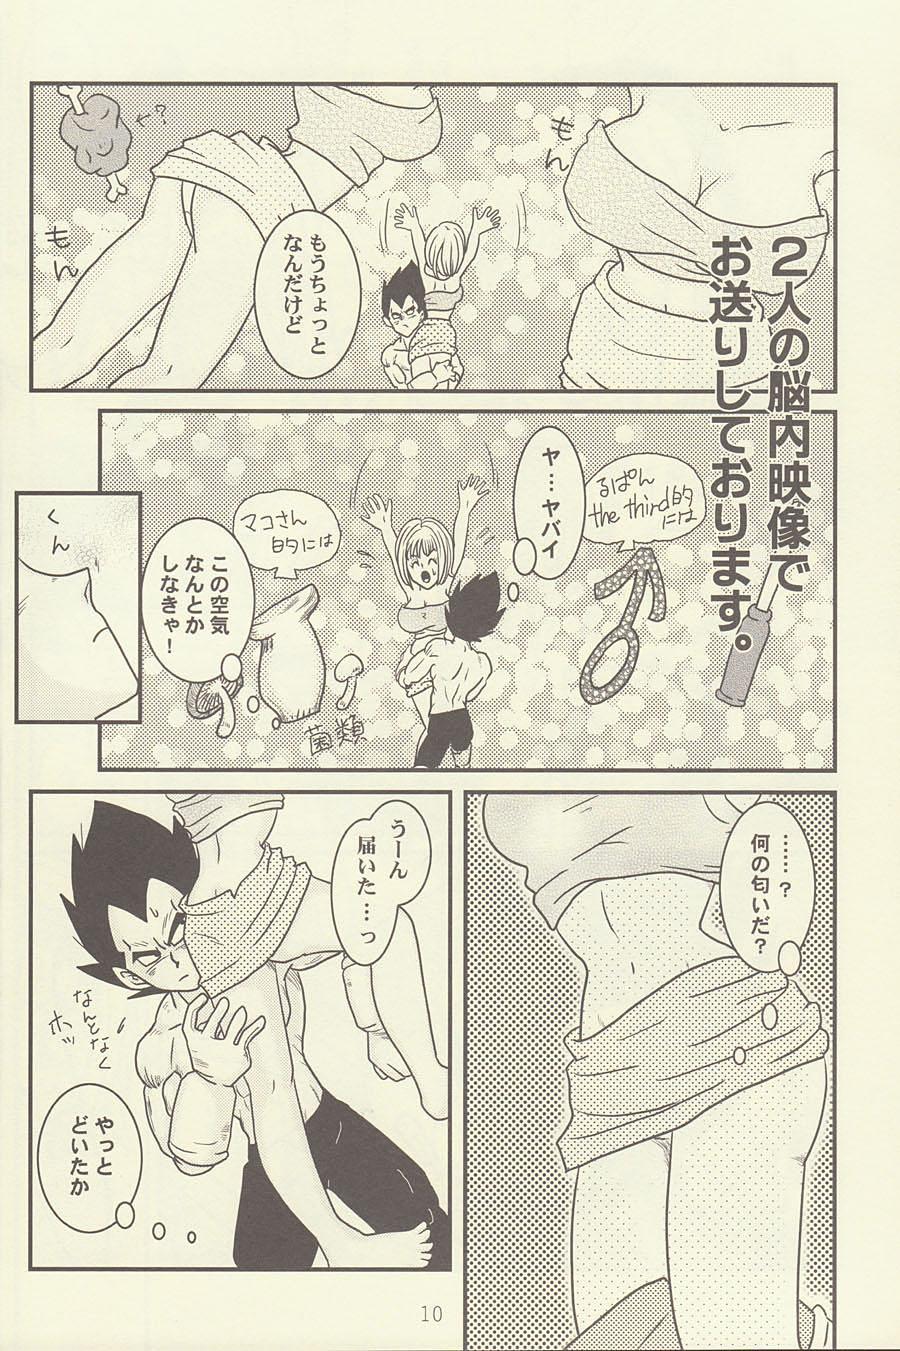 Ejaculations maitenence 2 - Dragon ball z Amateur - Page 11